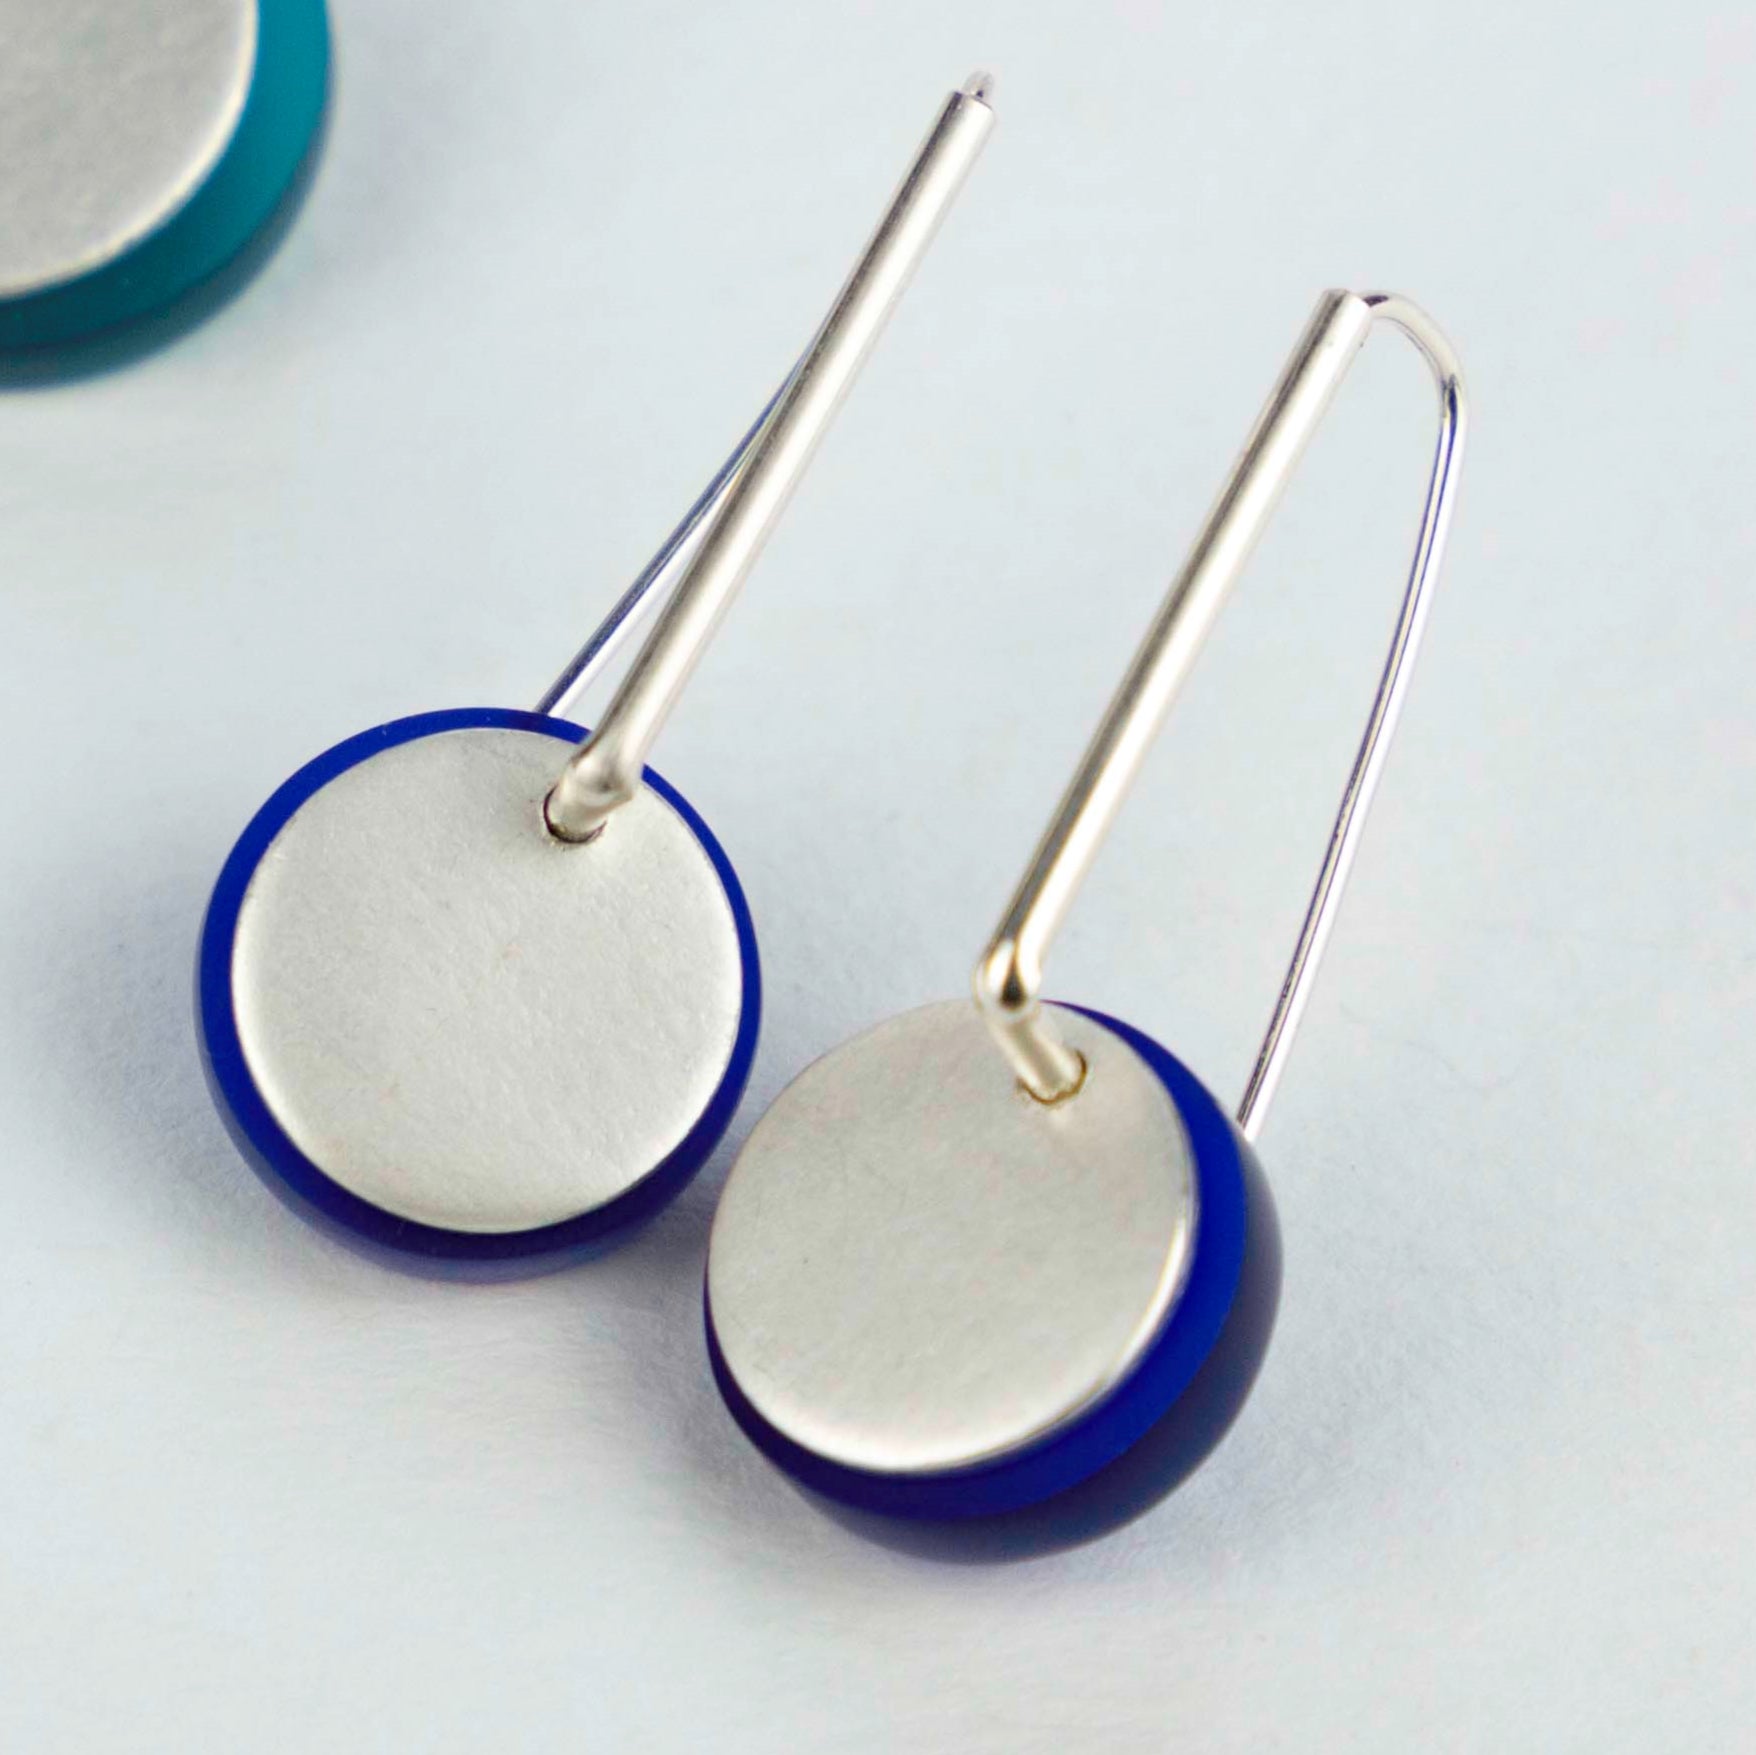 Silver and sapphire perspex earrings www.barbaraspence.co.uk